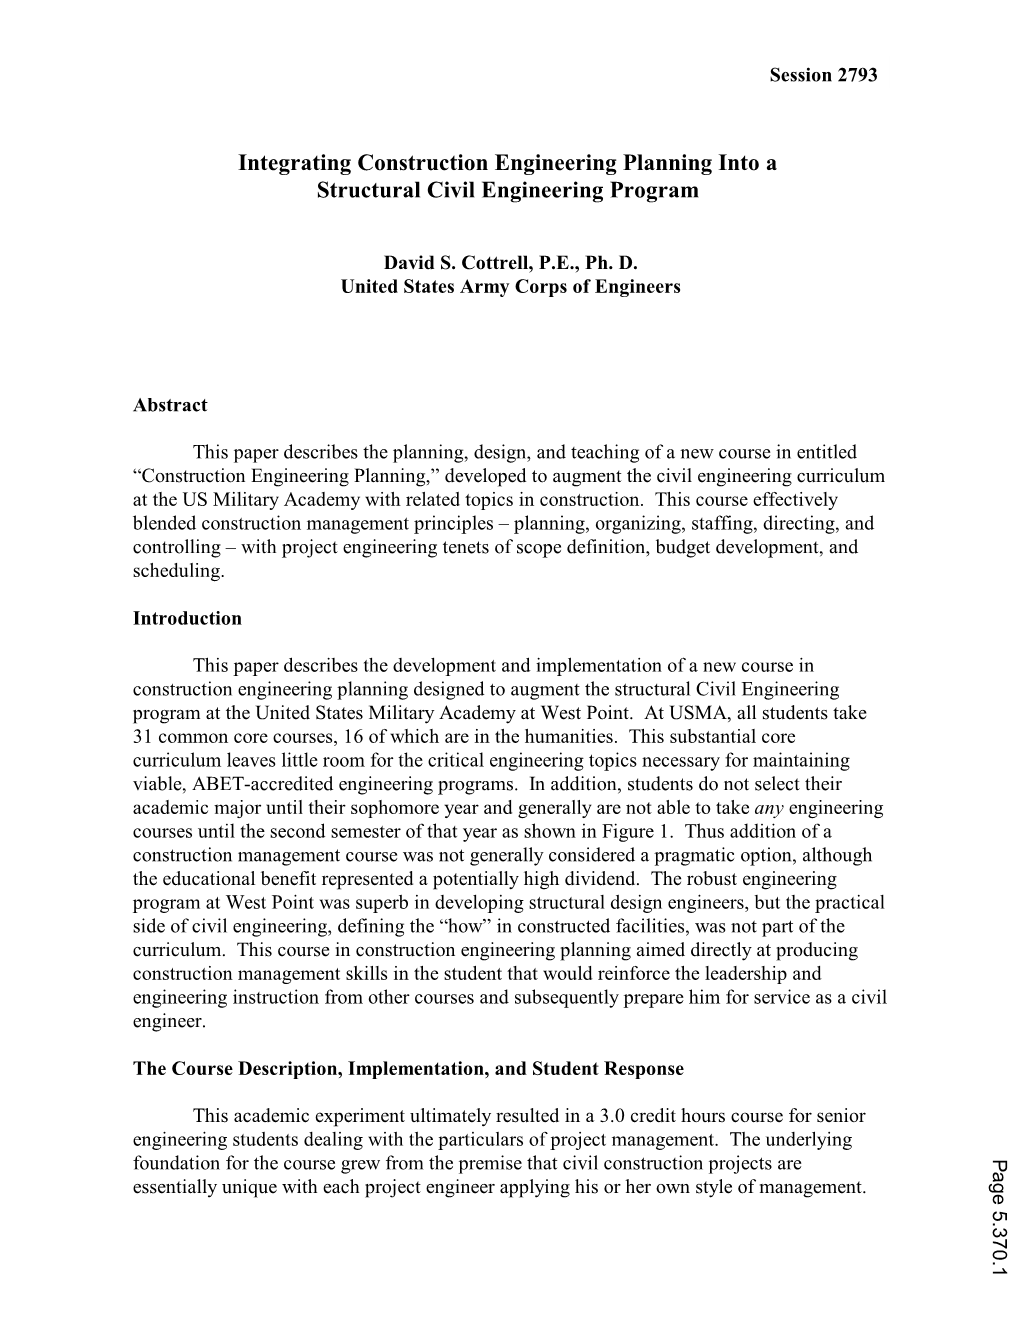 Integrating Construction Engineering Planning Into a Structural Civil Engineering Program